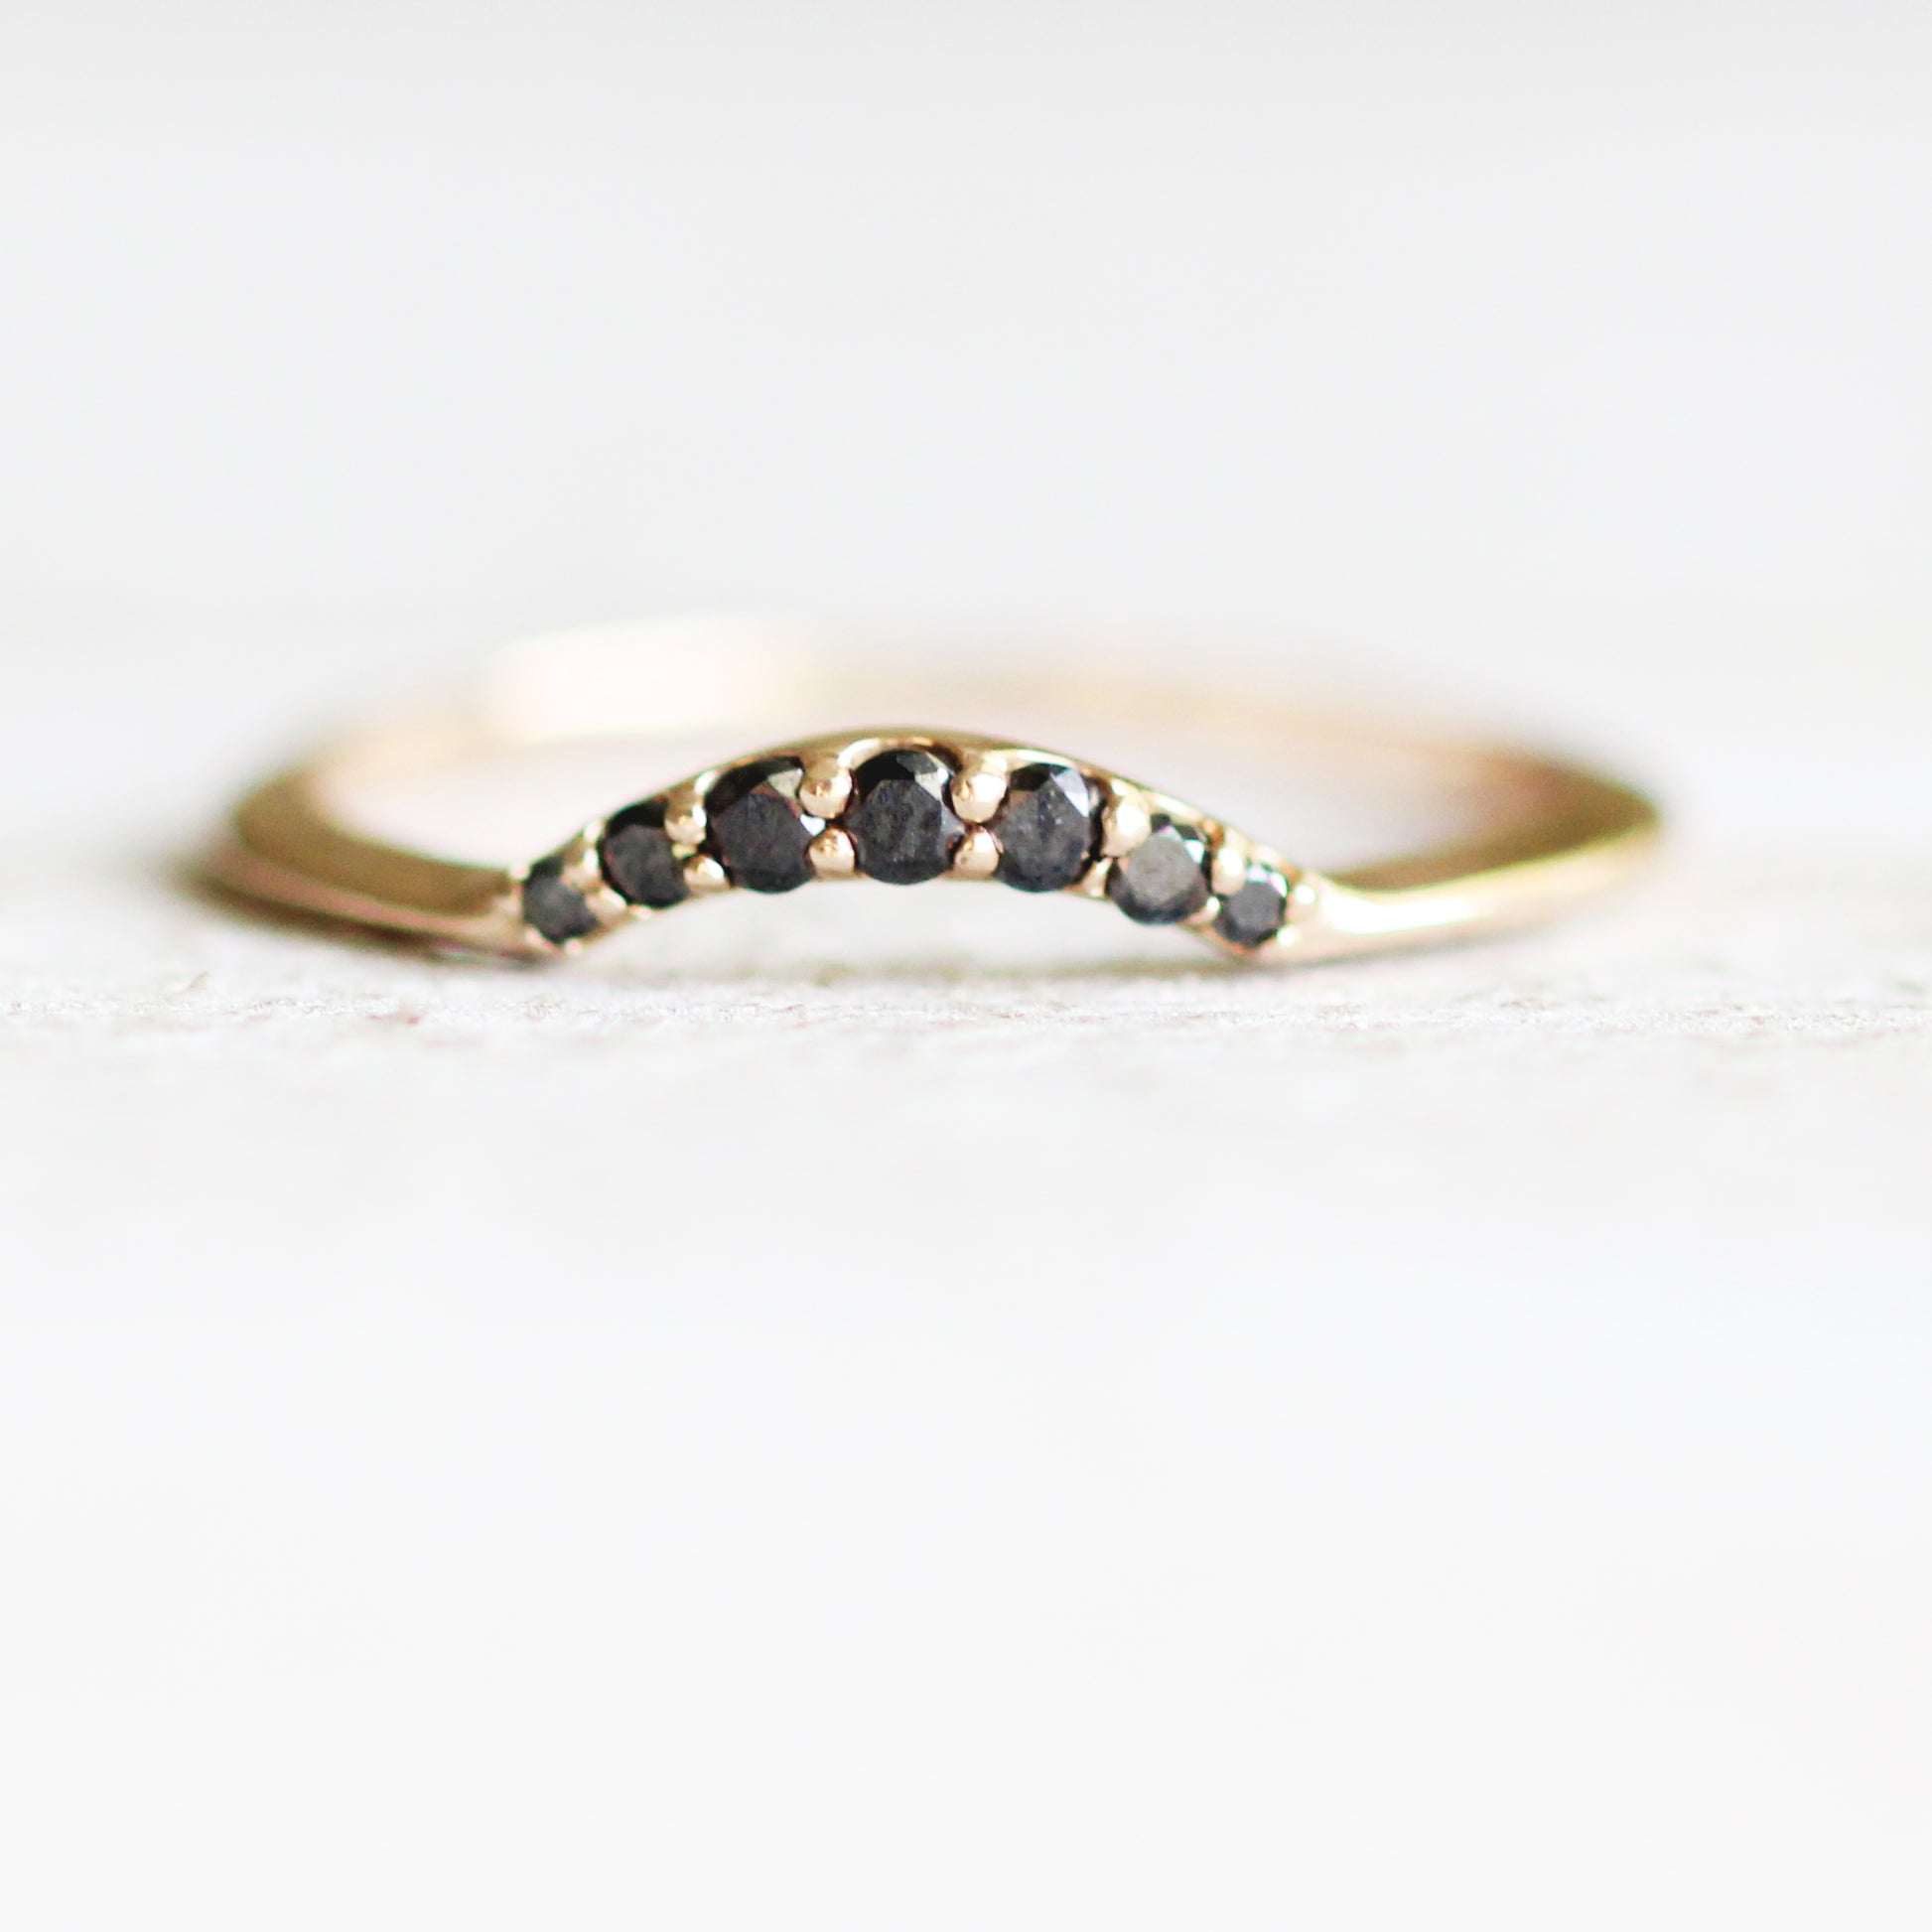 Evary - Custom Designed Curved Diamond Wedding Stacking Band - Made to order - Midwinter Co. Alternative Bridal Rings and Modern Fine Jewelry